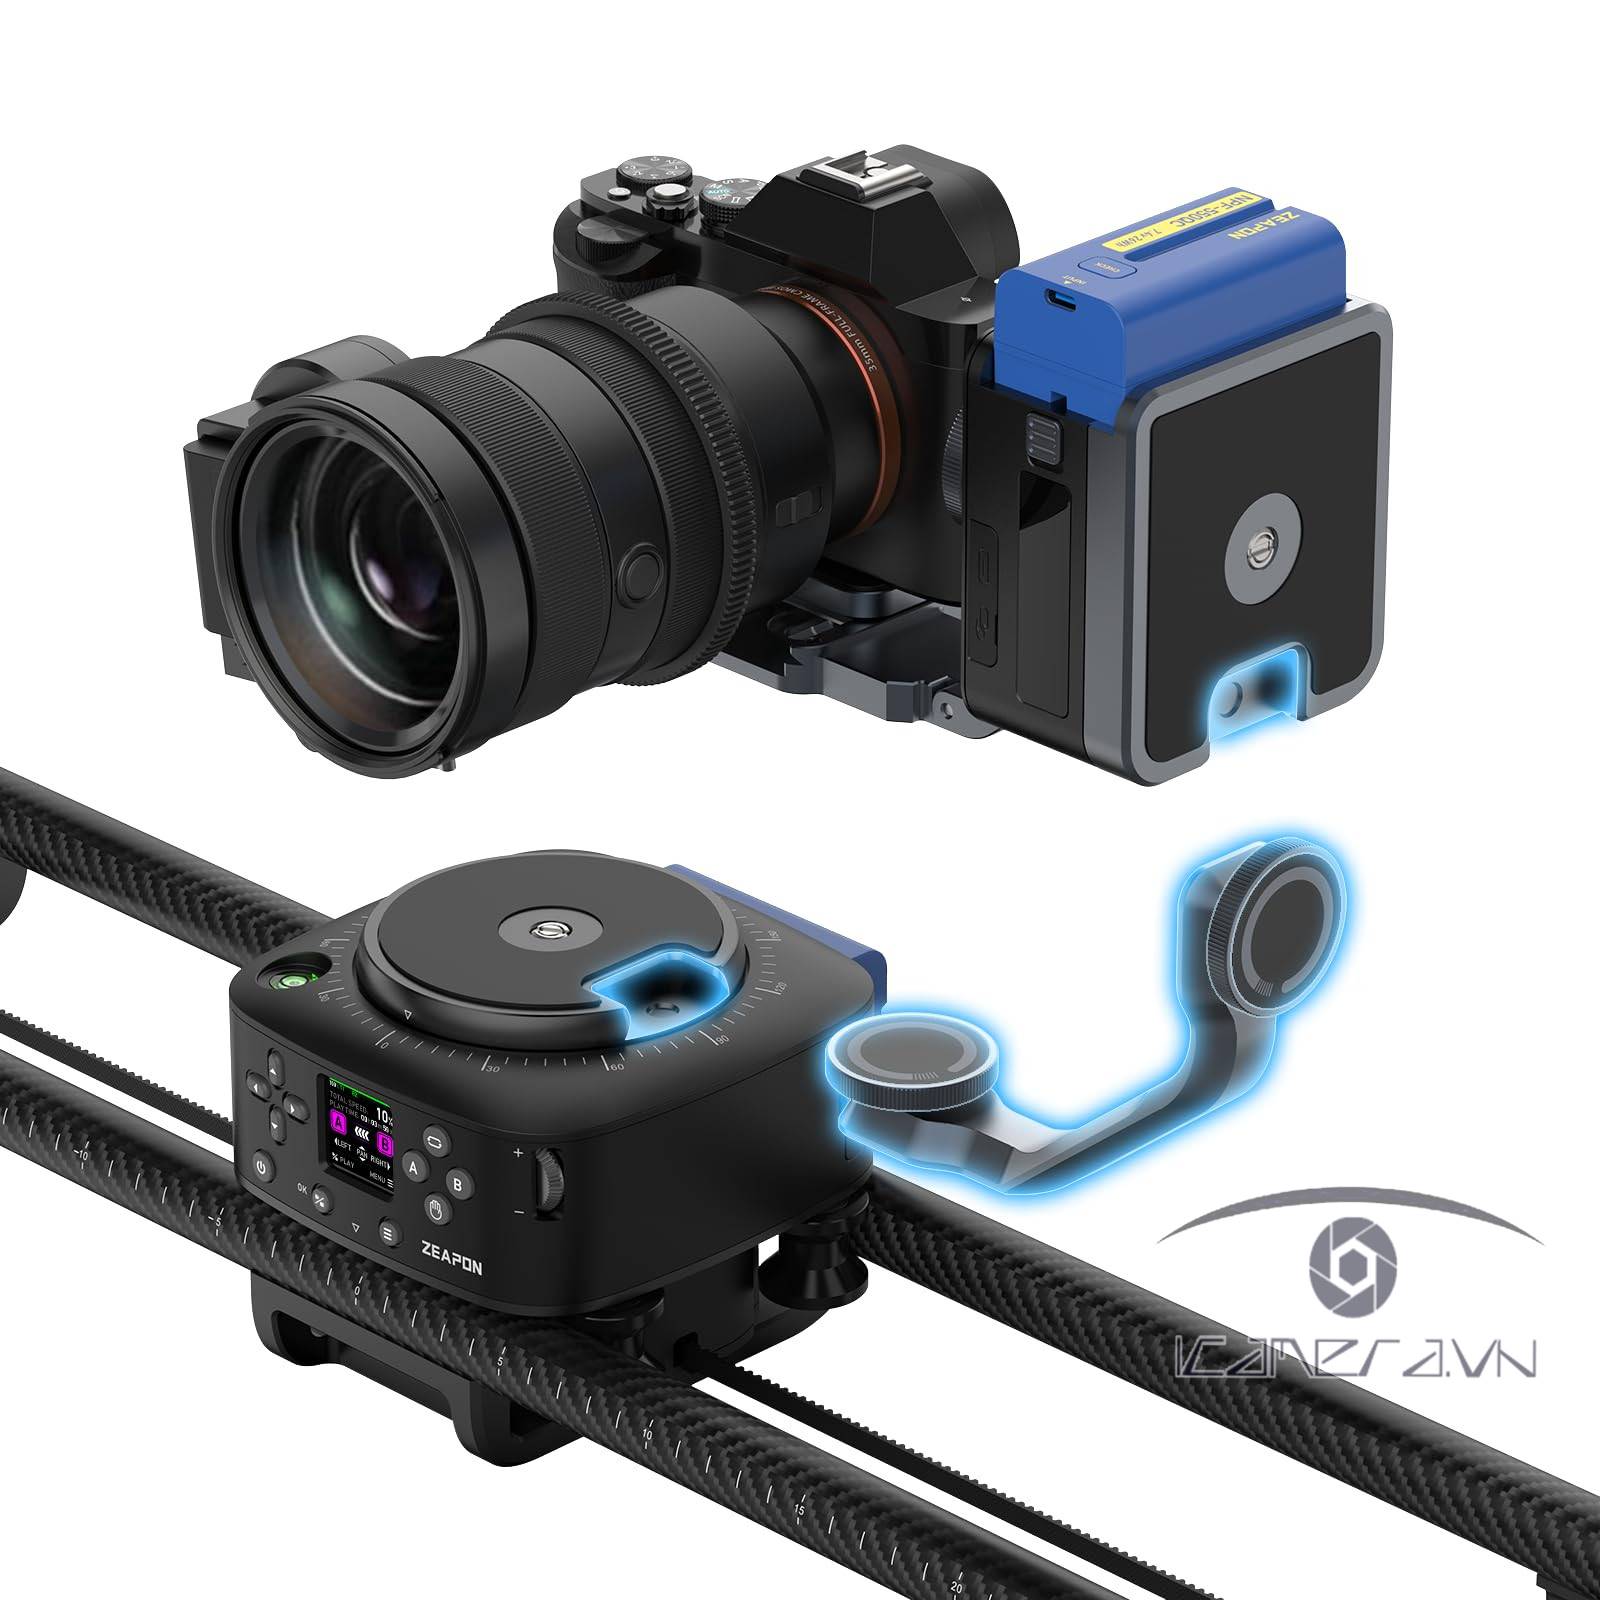 Thanh trượt Zeapon AXIS 100 Pro Multi-axis Motorized Slider (3-axis Version)